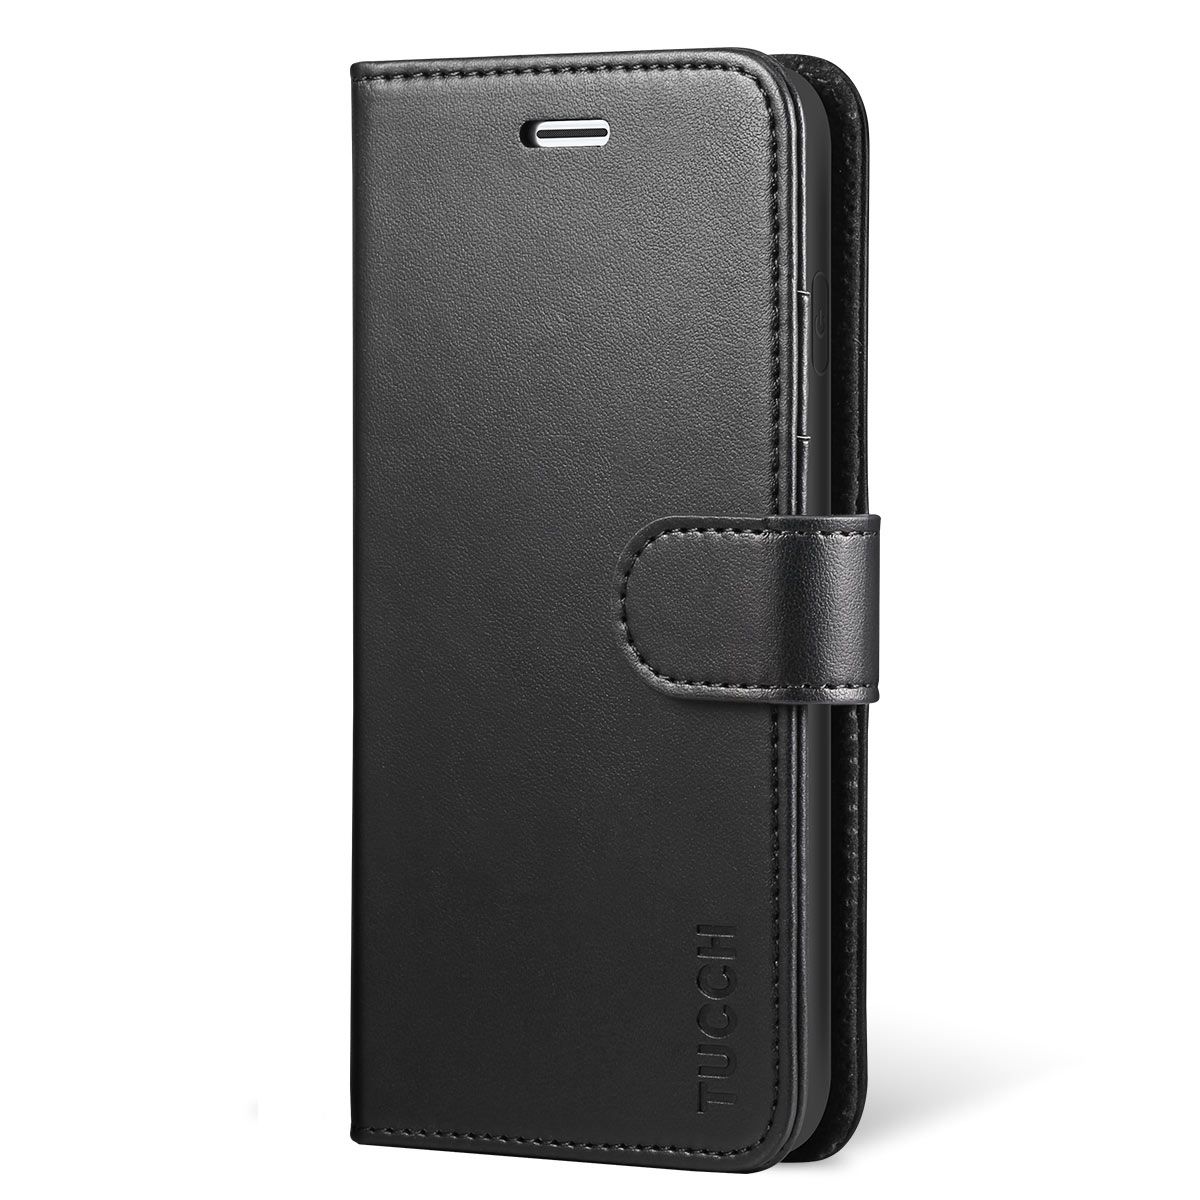 Elegant Black Wallet Case for iPhone XR PU Leather Flip Cover Compatible with iPhone XR 